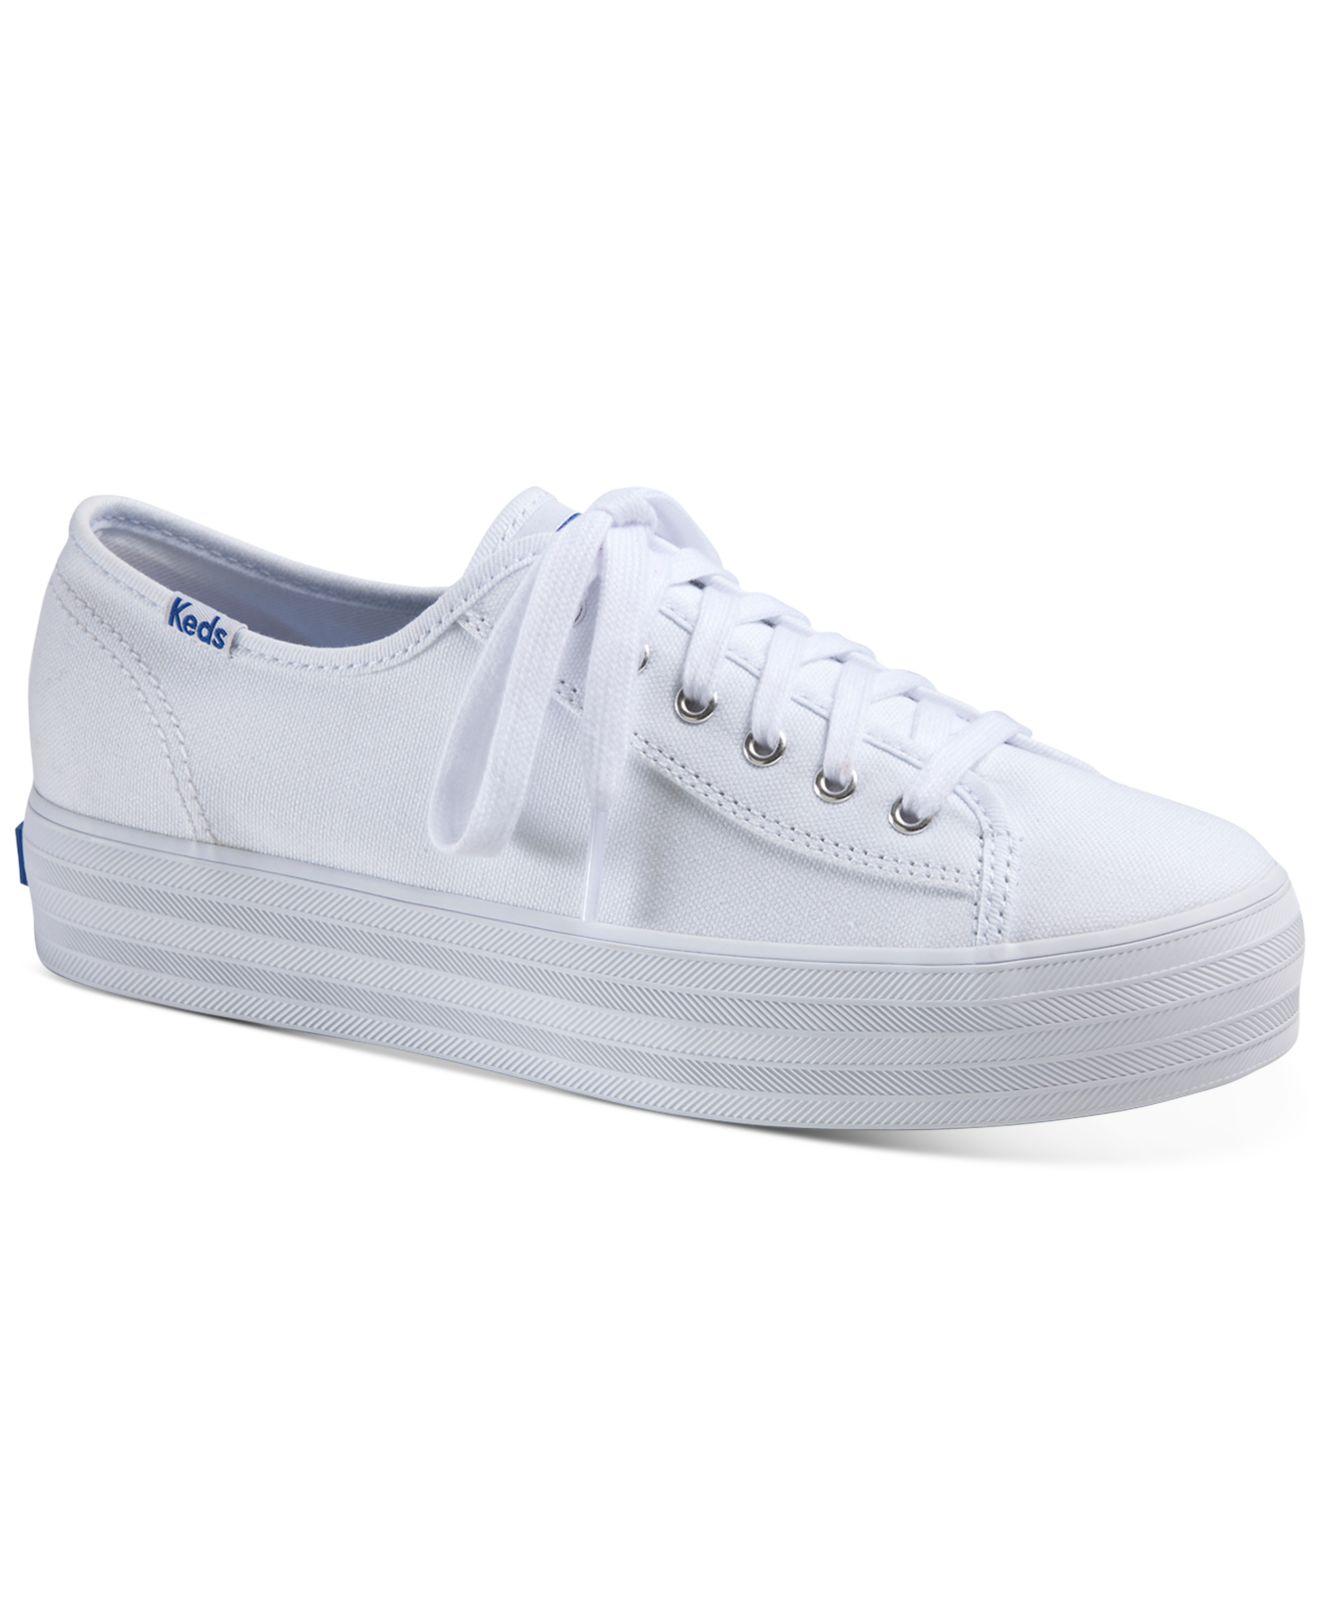 Keds Triple Canvas Sneaker in White - Save 20% - Lyst